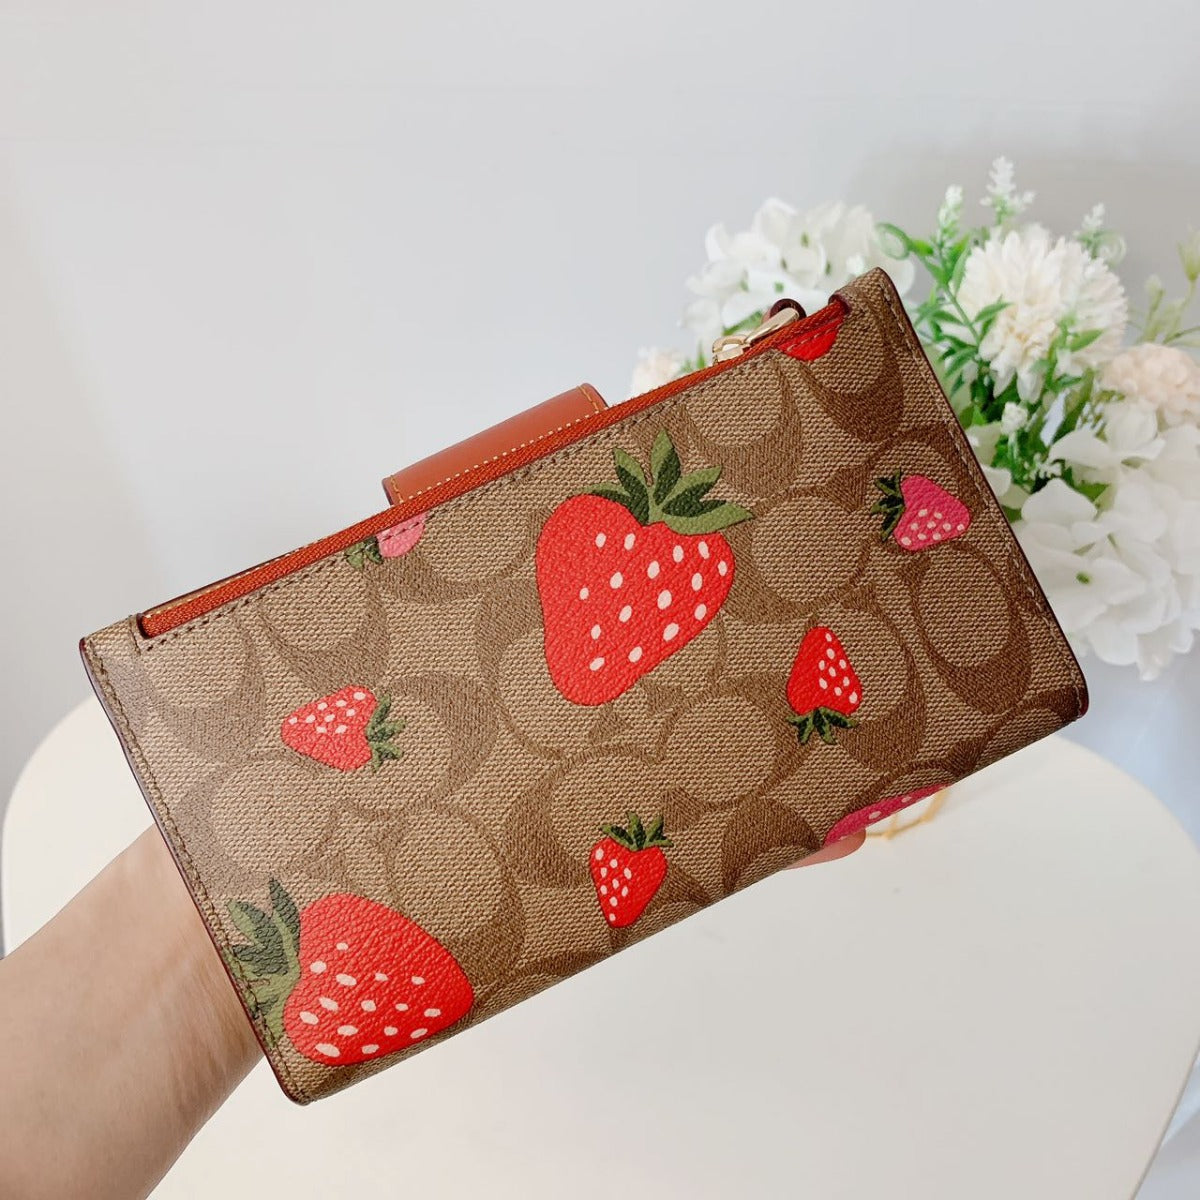 Coach CH165 Tech Wallet In Signature Canvas With Wild Strawberry Print IN Khaki Multi